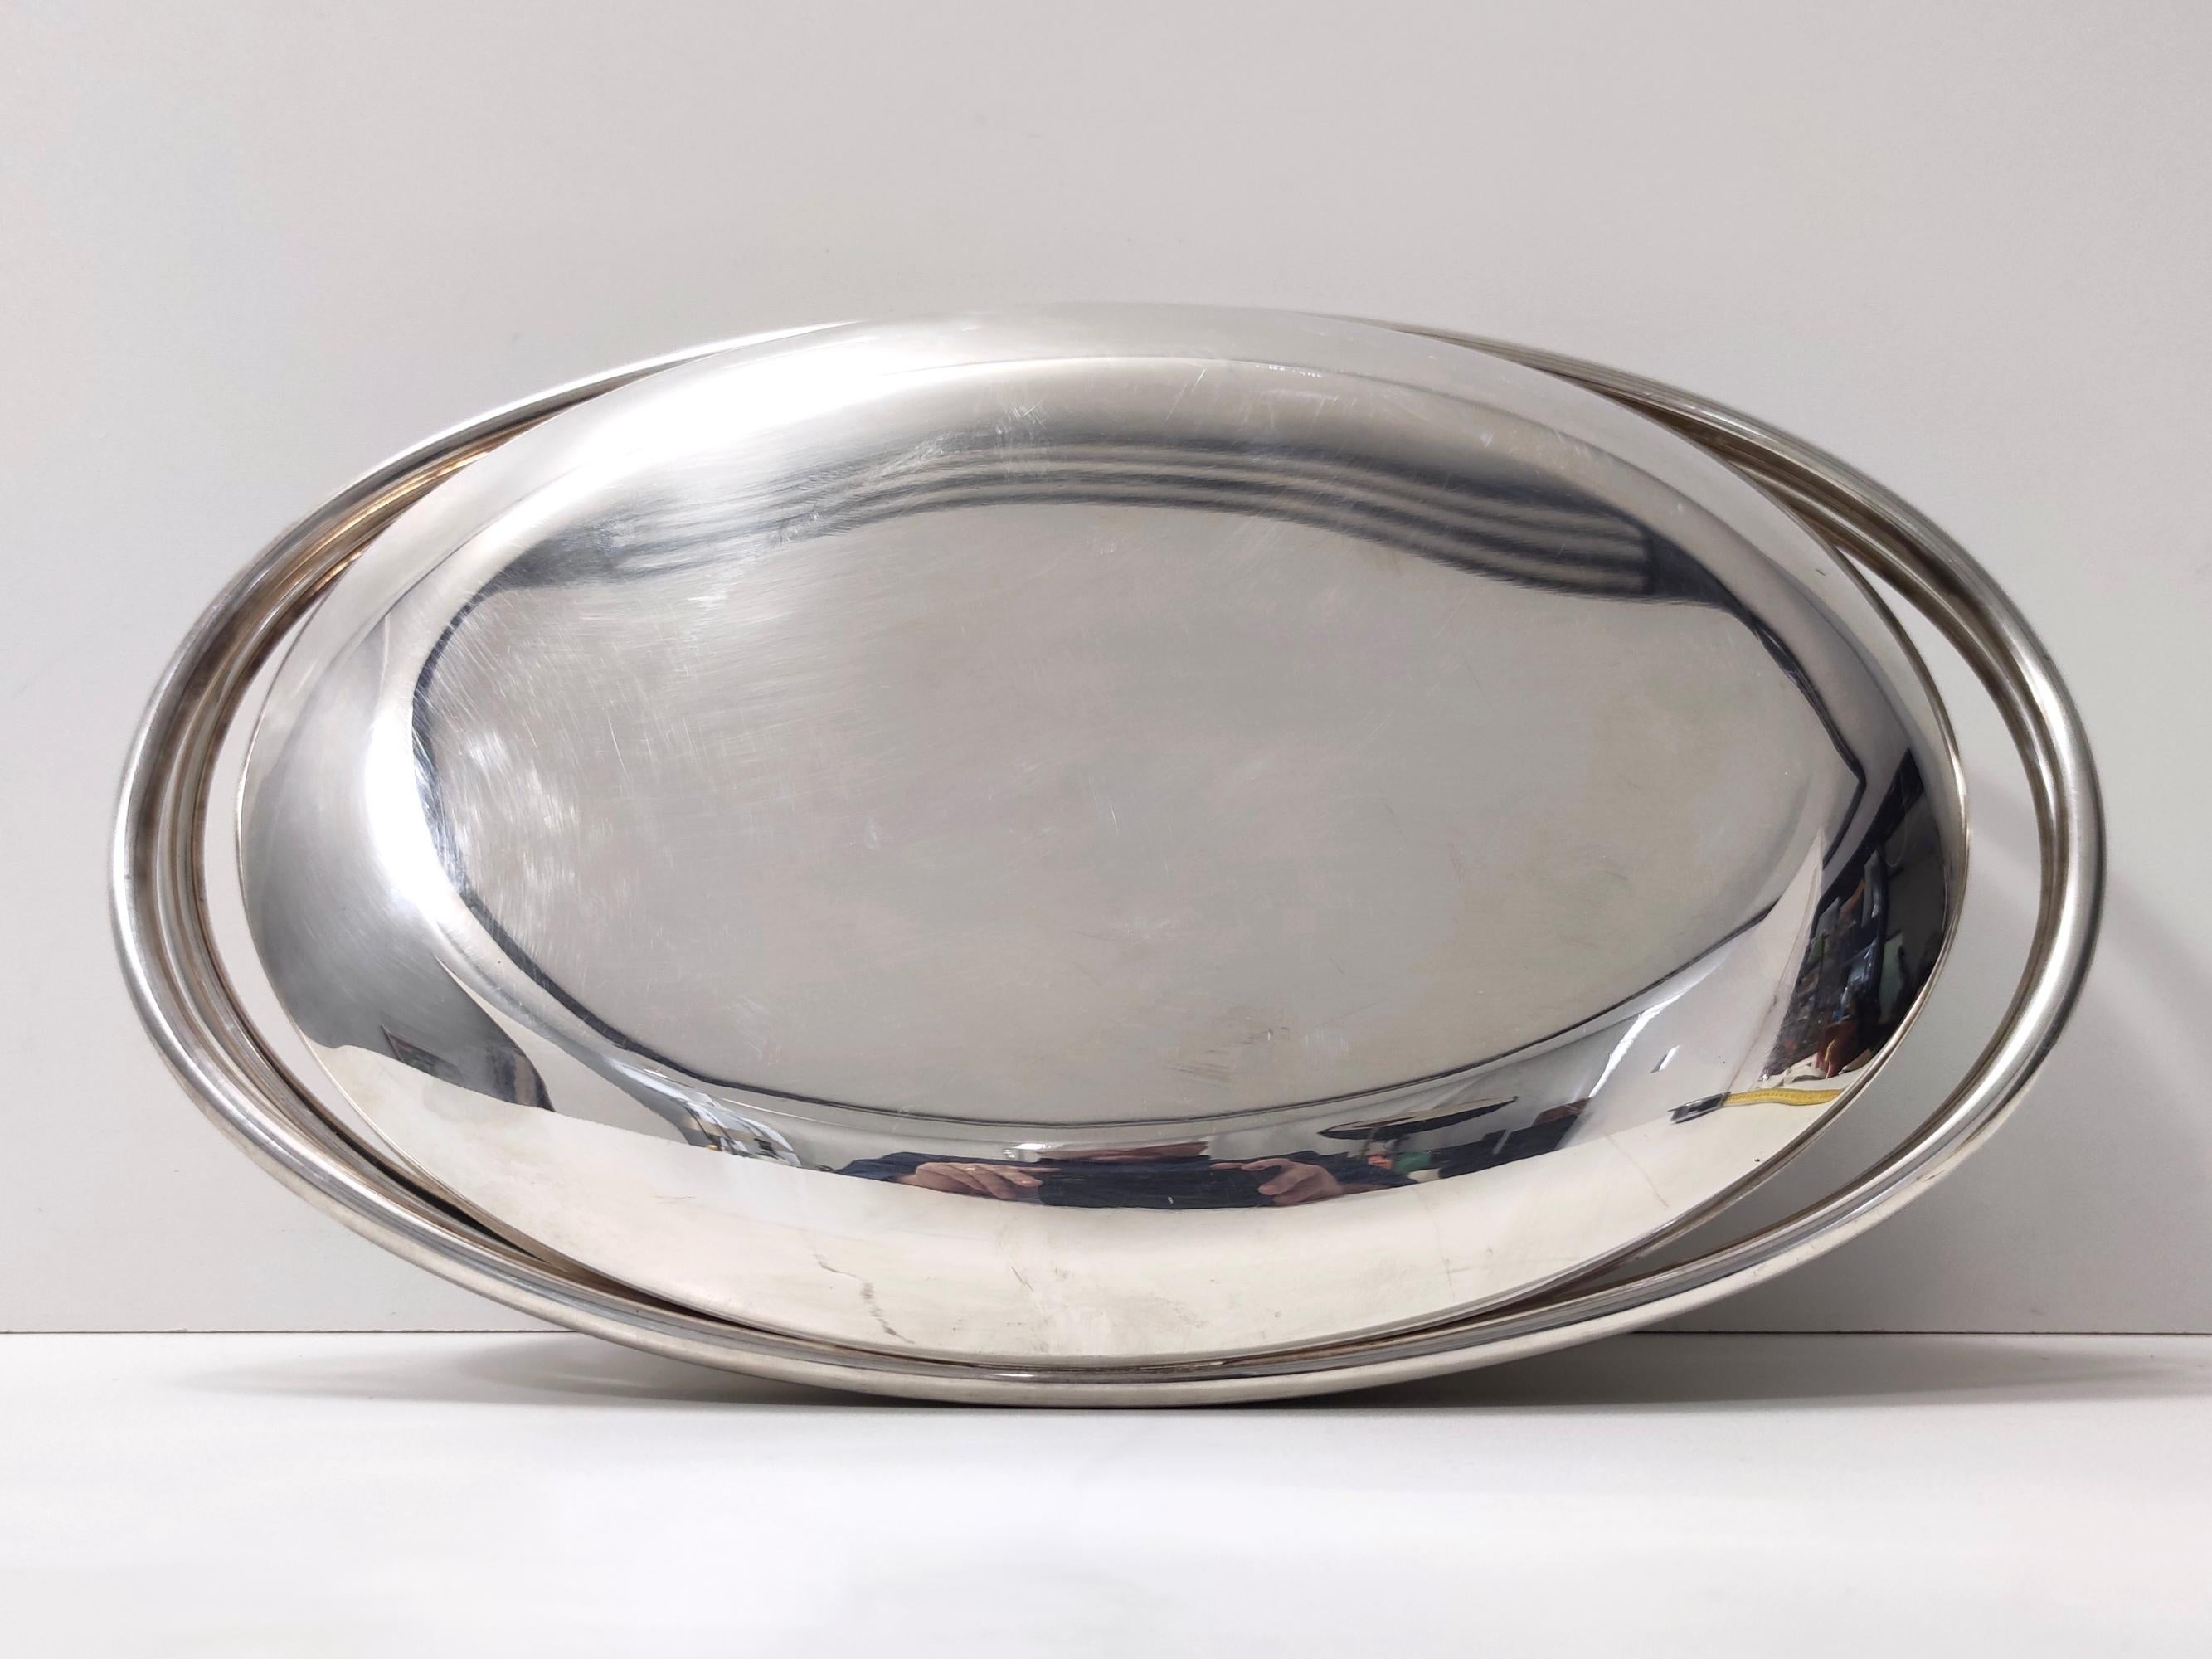 Silver Plated Venison Dish with Pyrex Glass Casserole Dish by Sabattini, Italy In Excellent Condition For Sale In Bresso, Lombardy